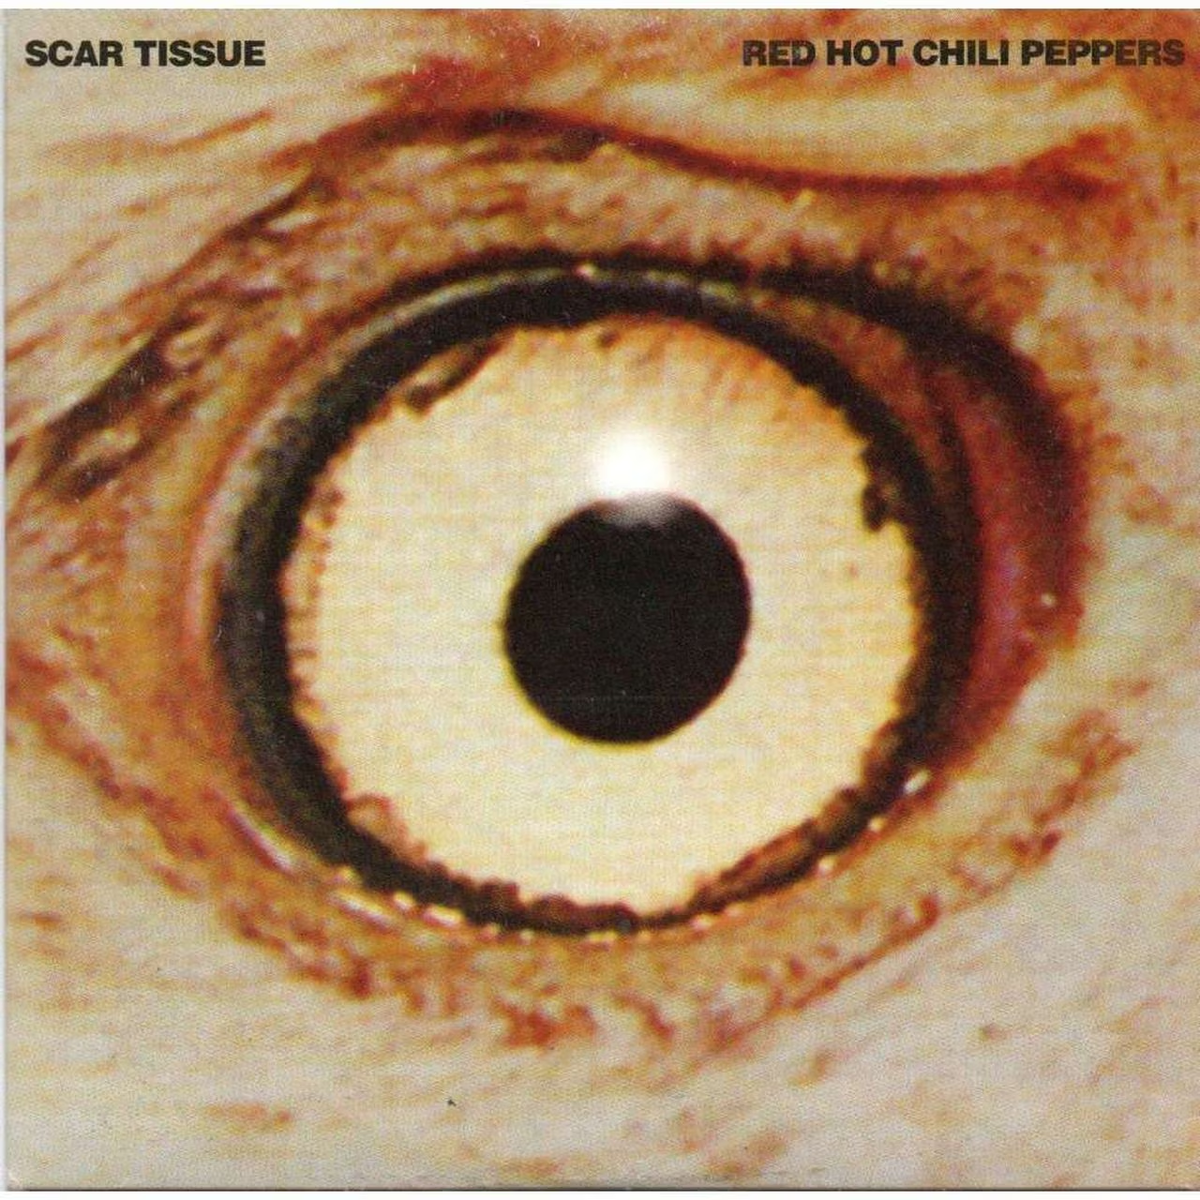 Red hot chili peppers tissue. Scar Tissue Red hot Chili Peppers. Scar Tissue Red hot Chili Peppers обложка. Red hot Chili scar Tissue. Scar Tissue Red hot Chili Peppers клип.